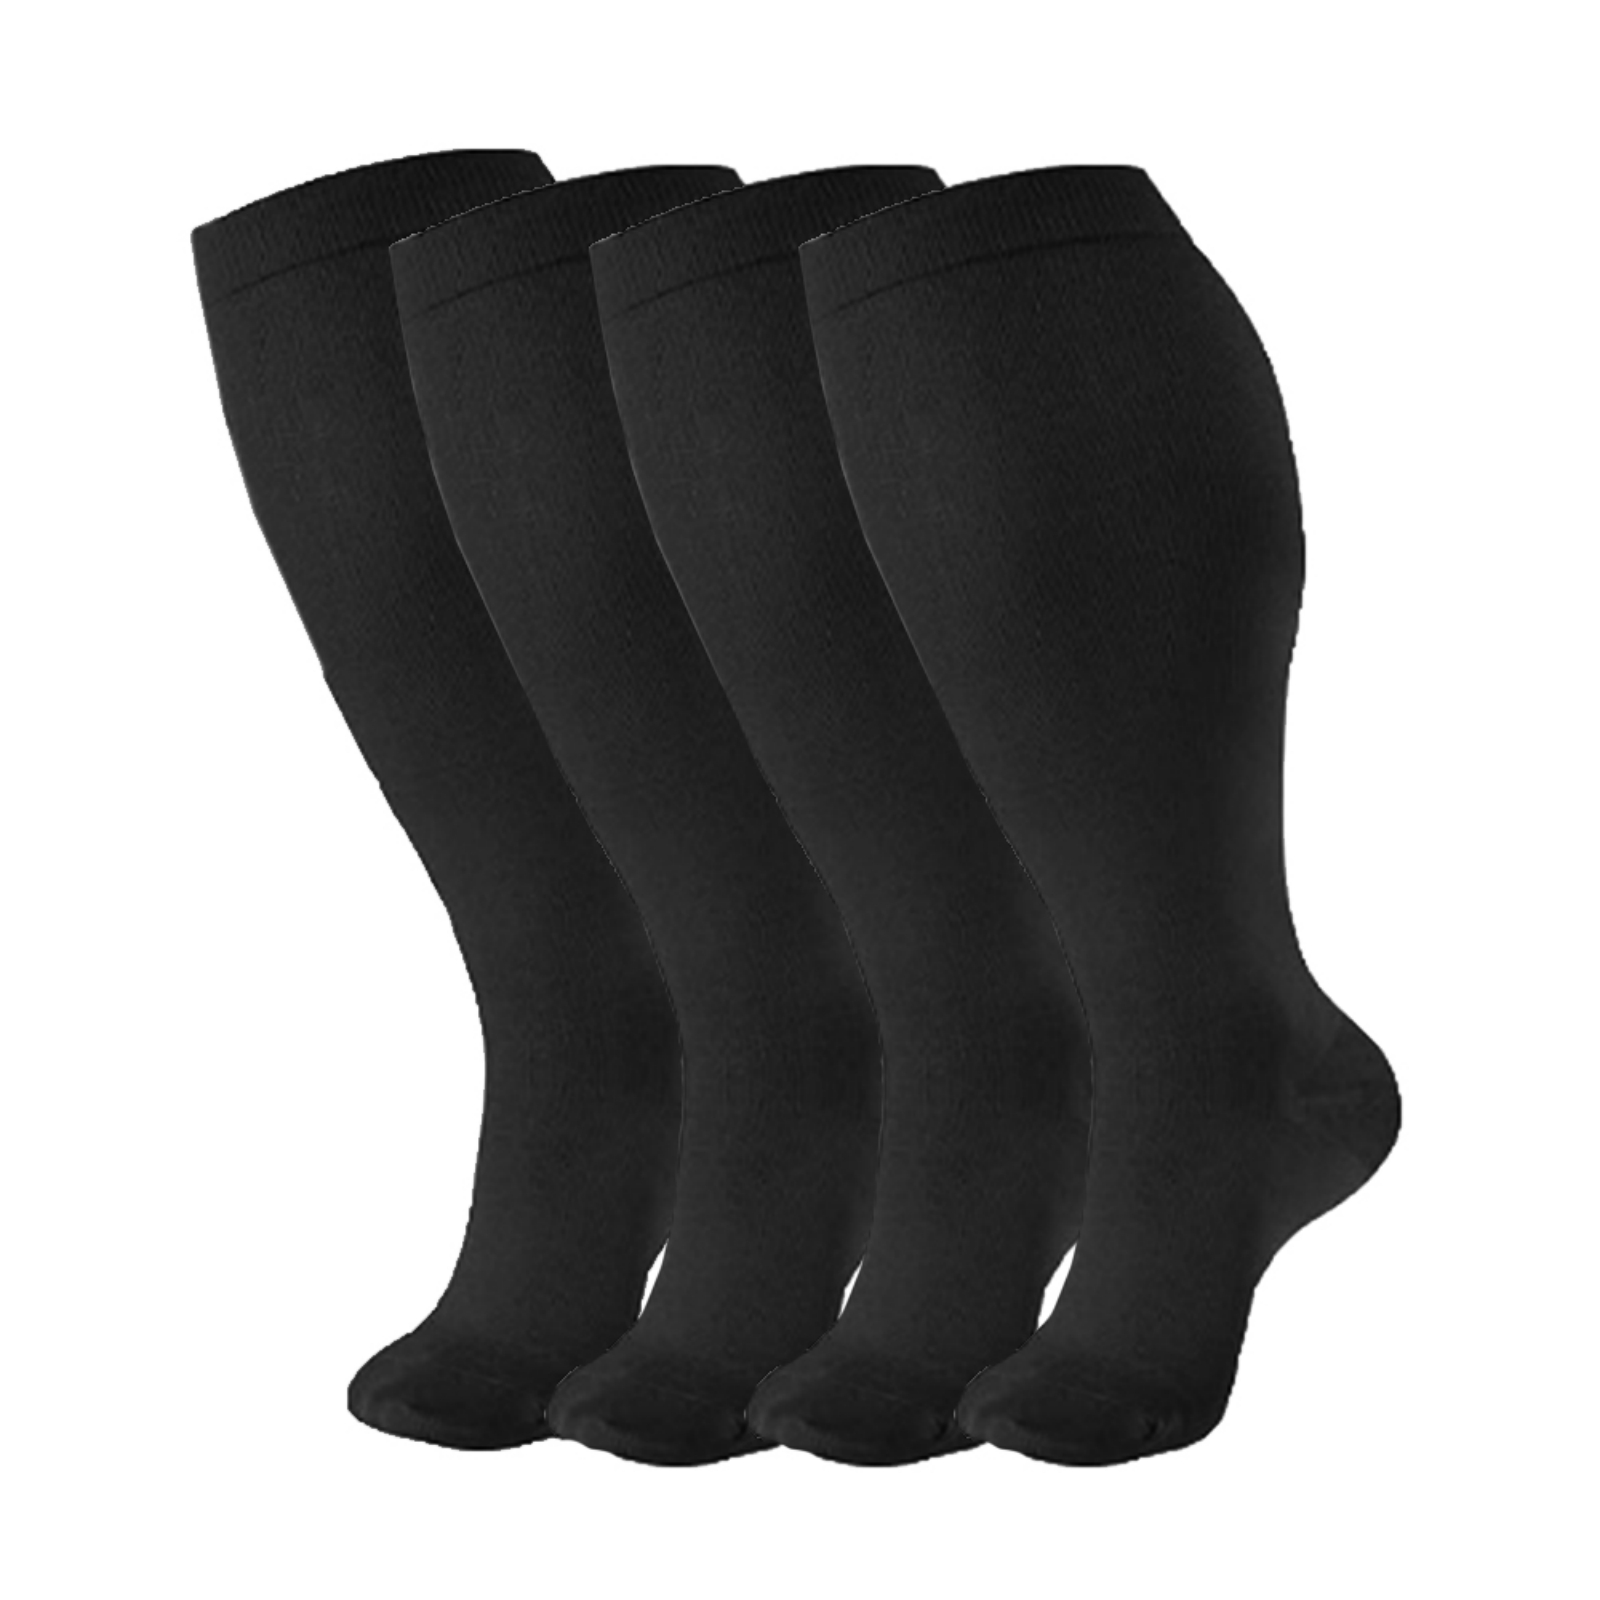 4 Packs Plus Size Compression Socks, Compression Stockings for Women ...